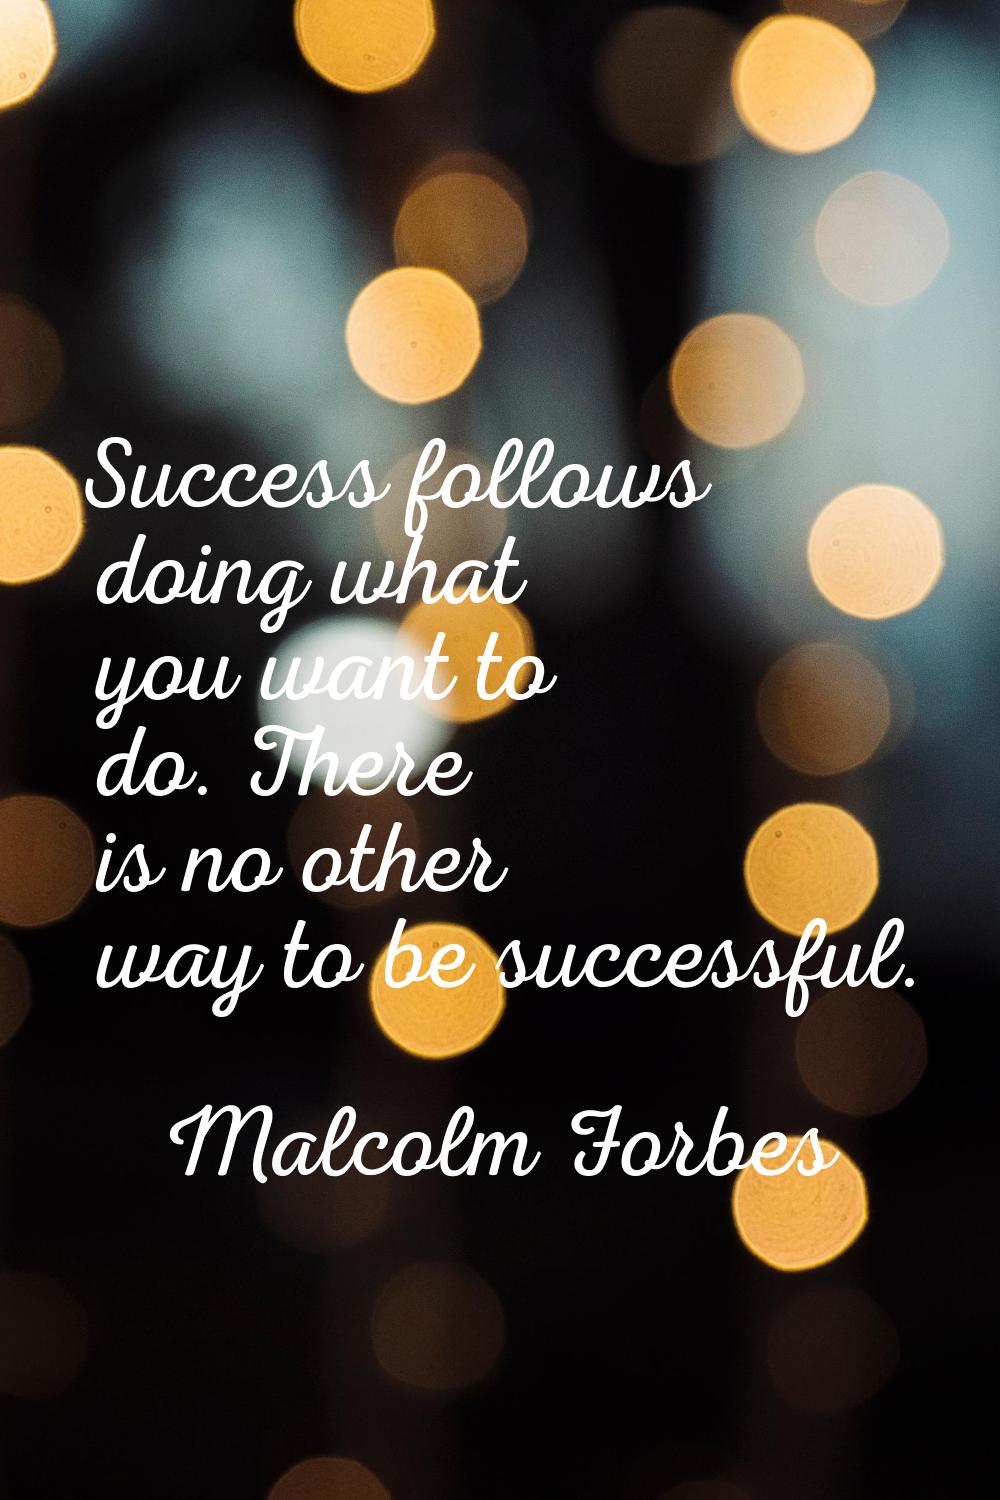 Success follows doing what you want to do. There is no other way to be successful.